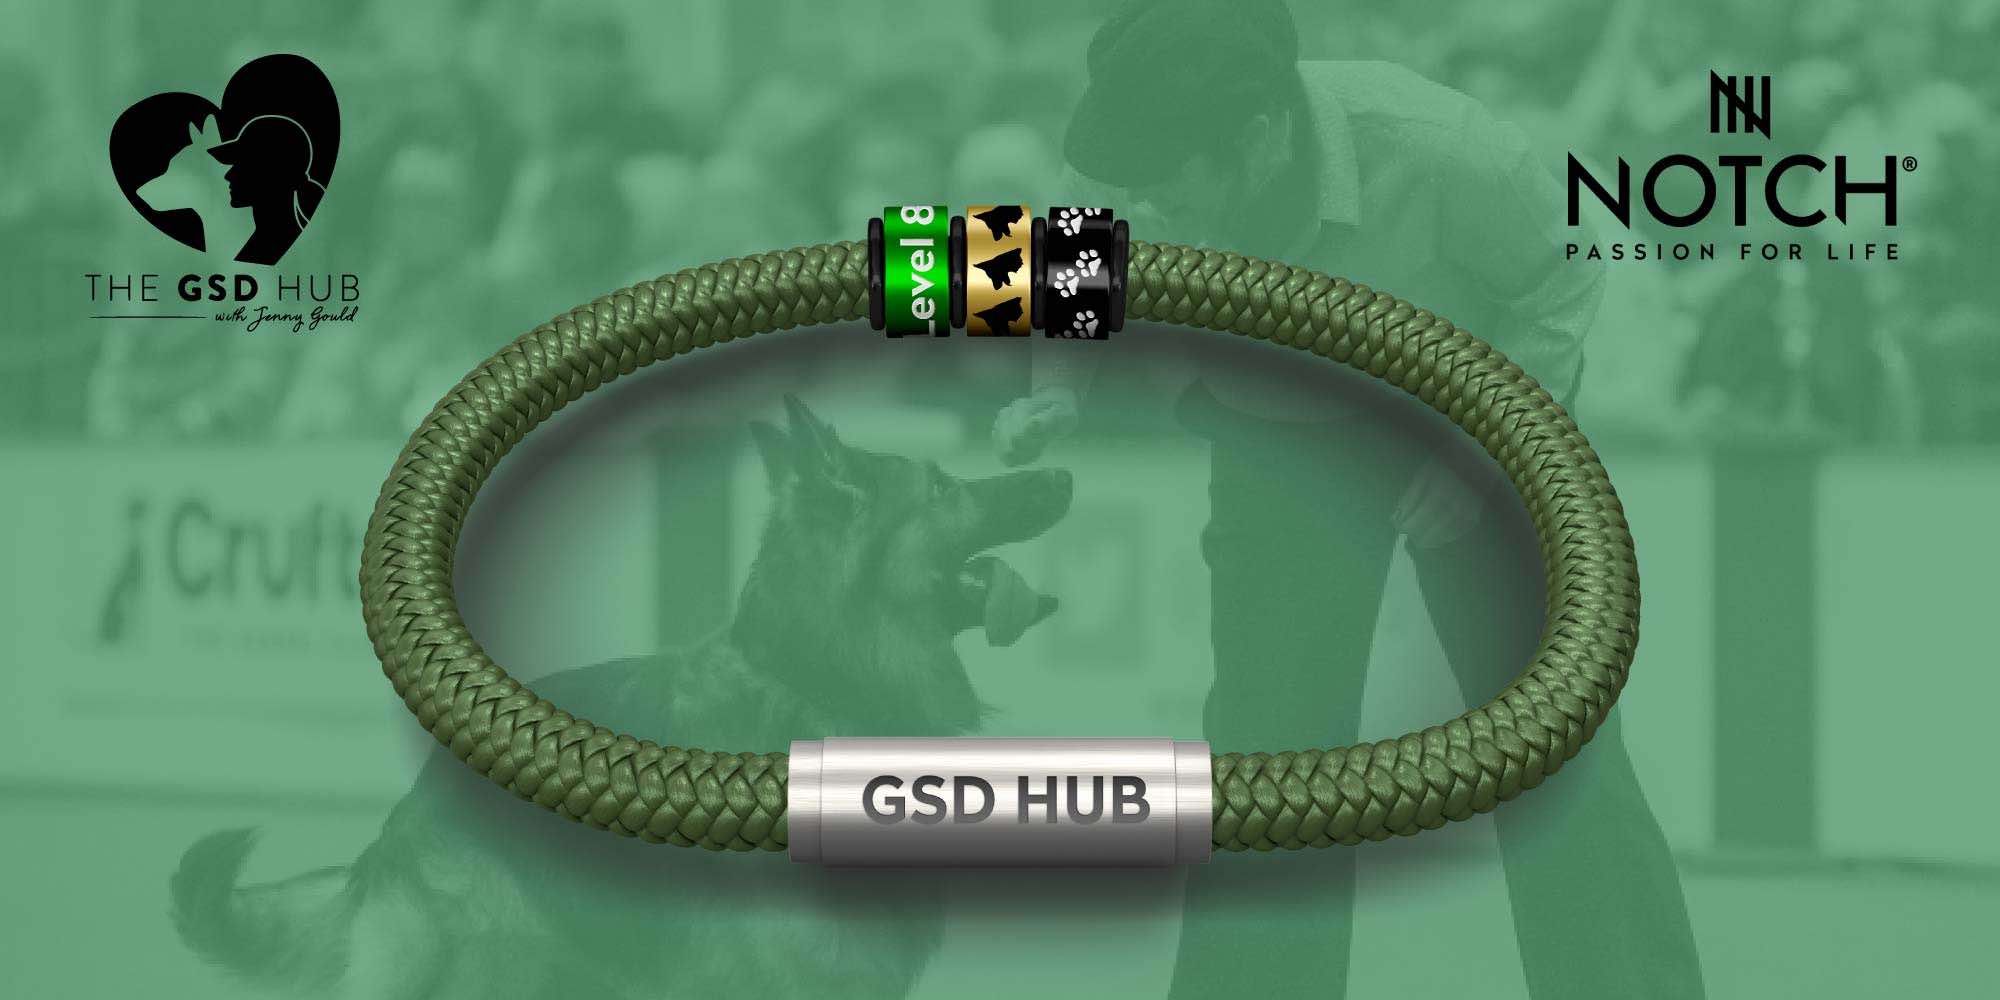 The GSD Hub NOTCH Collection